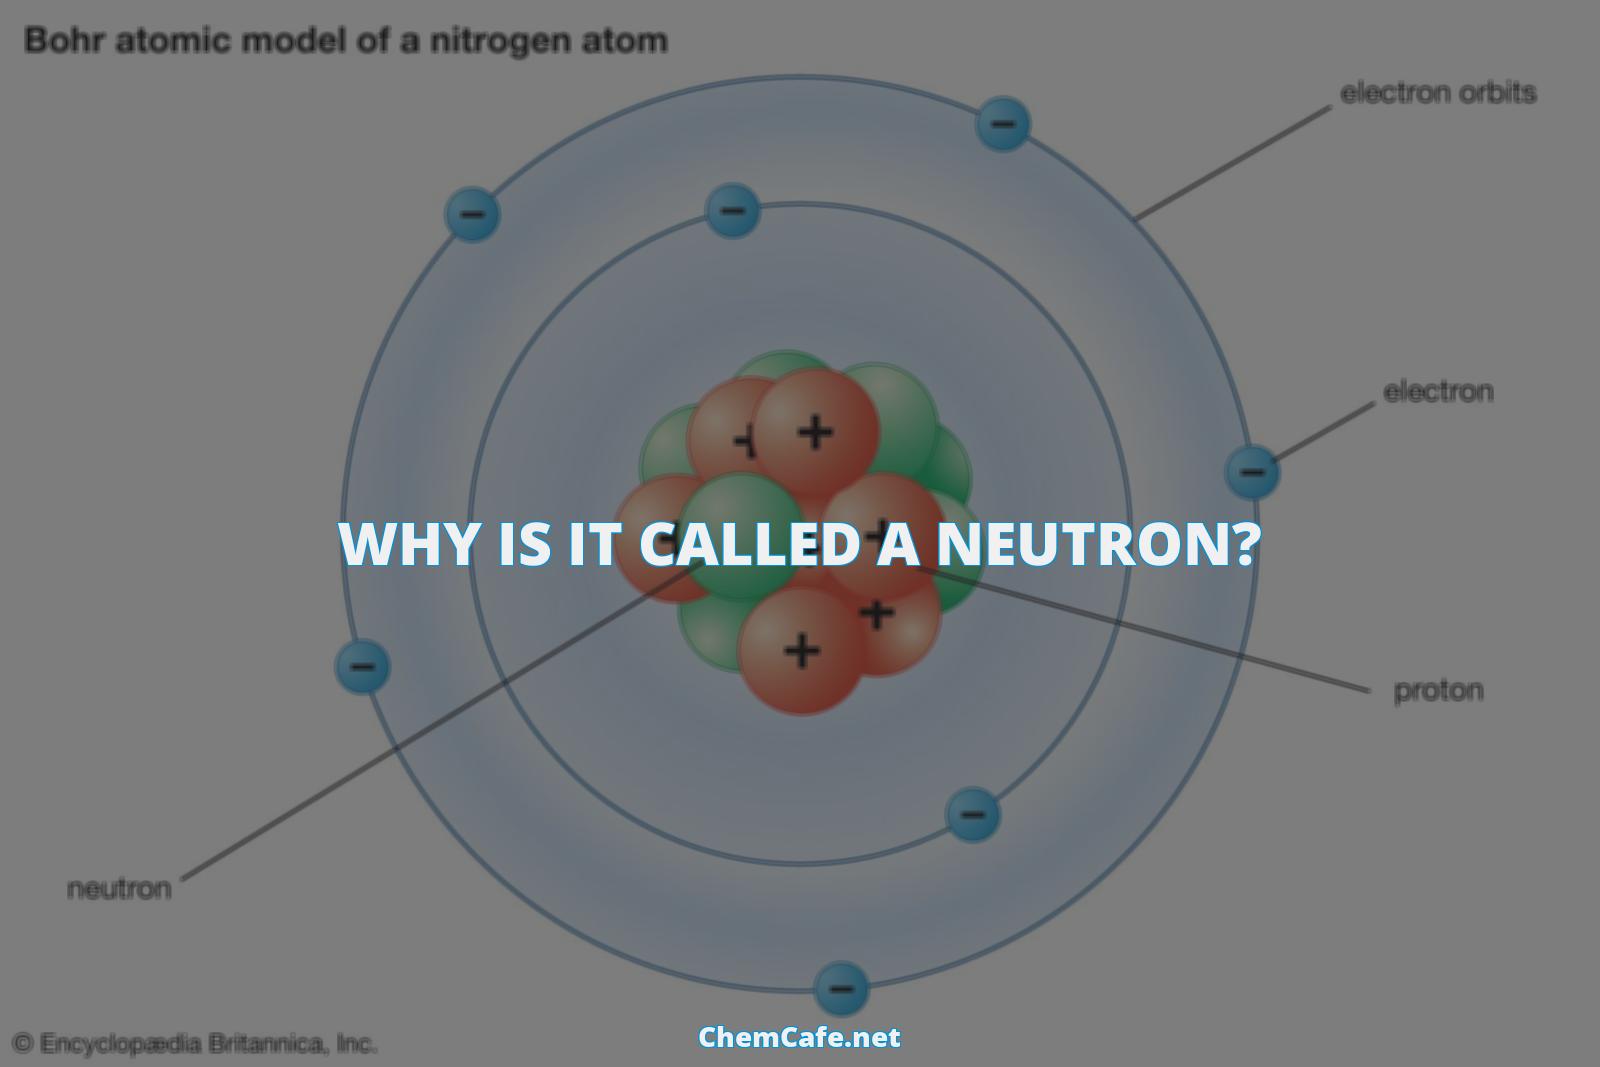 why is it called a neutron?